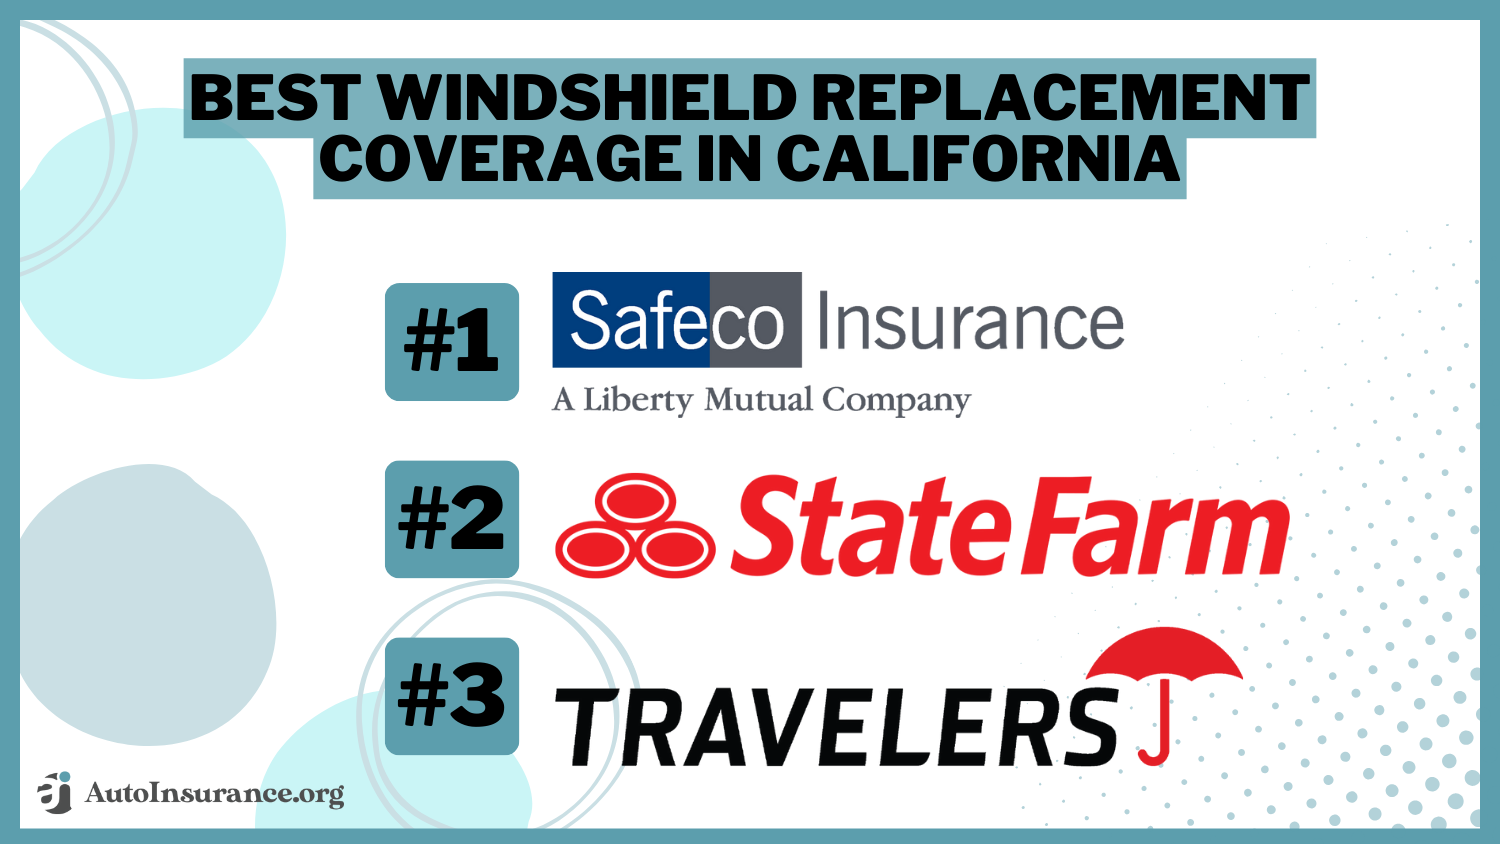 Best Windshield Replacement Coverage in California: Safeco, State Farm, and Travelers